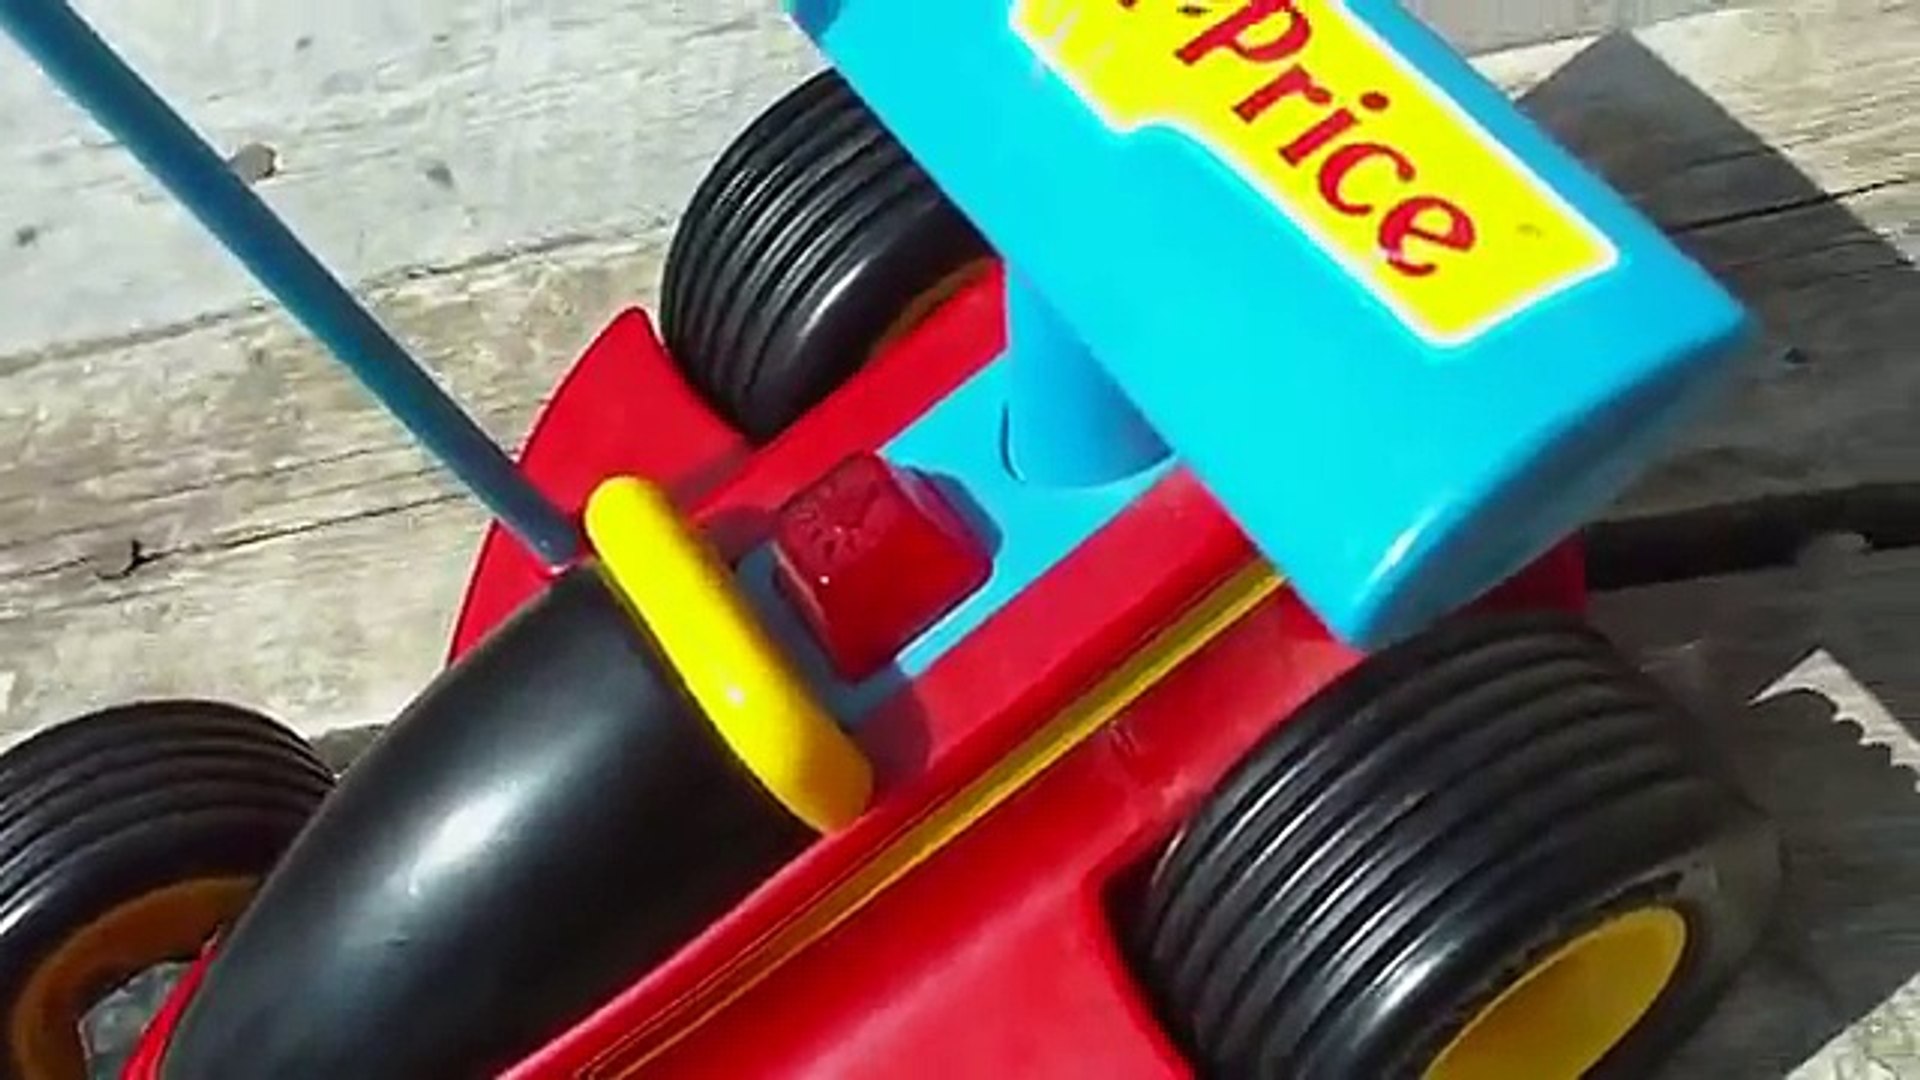 fisher price remote control car , great starter RC car for kids , cheap fun  for little ones - video Dailymotion